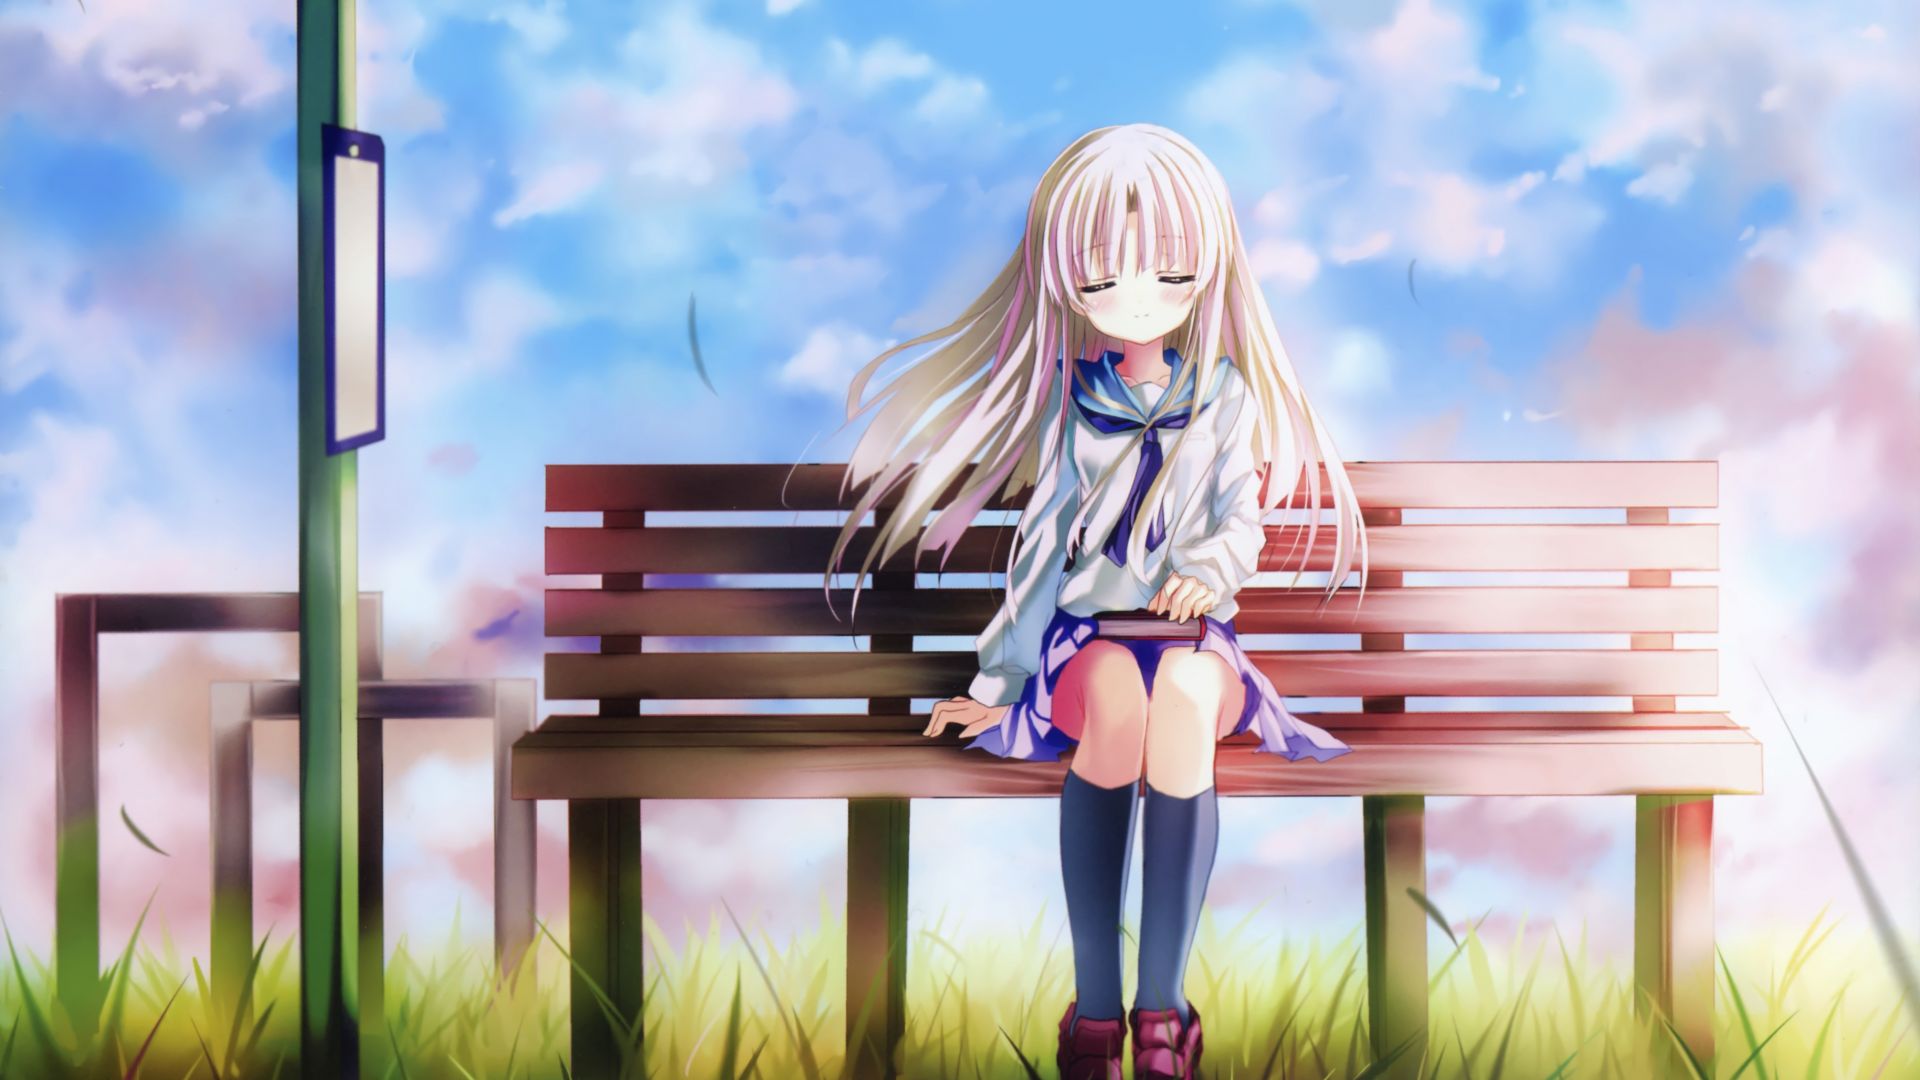 Desktop Wallpaper Cute Girl, Bench, Sit, Relaxed, Anime, Hd Image, Picture,  Background, Ii1kpr